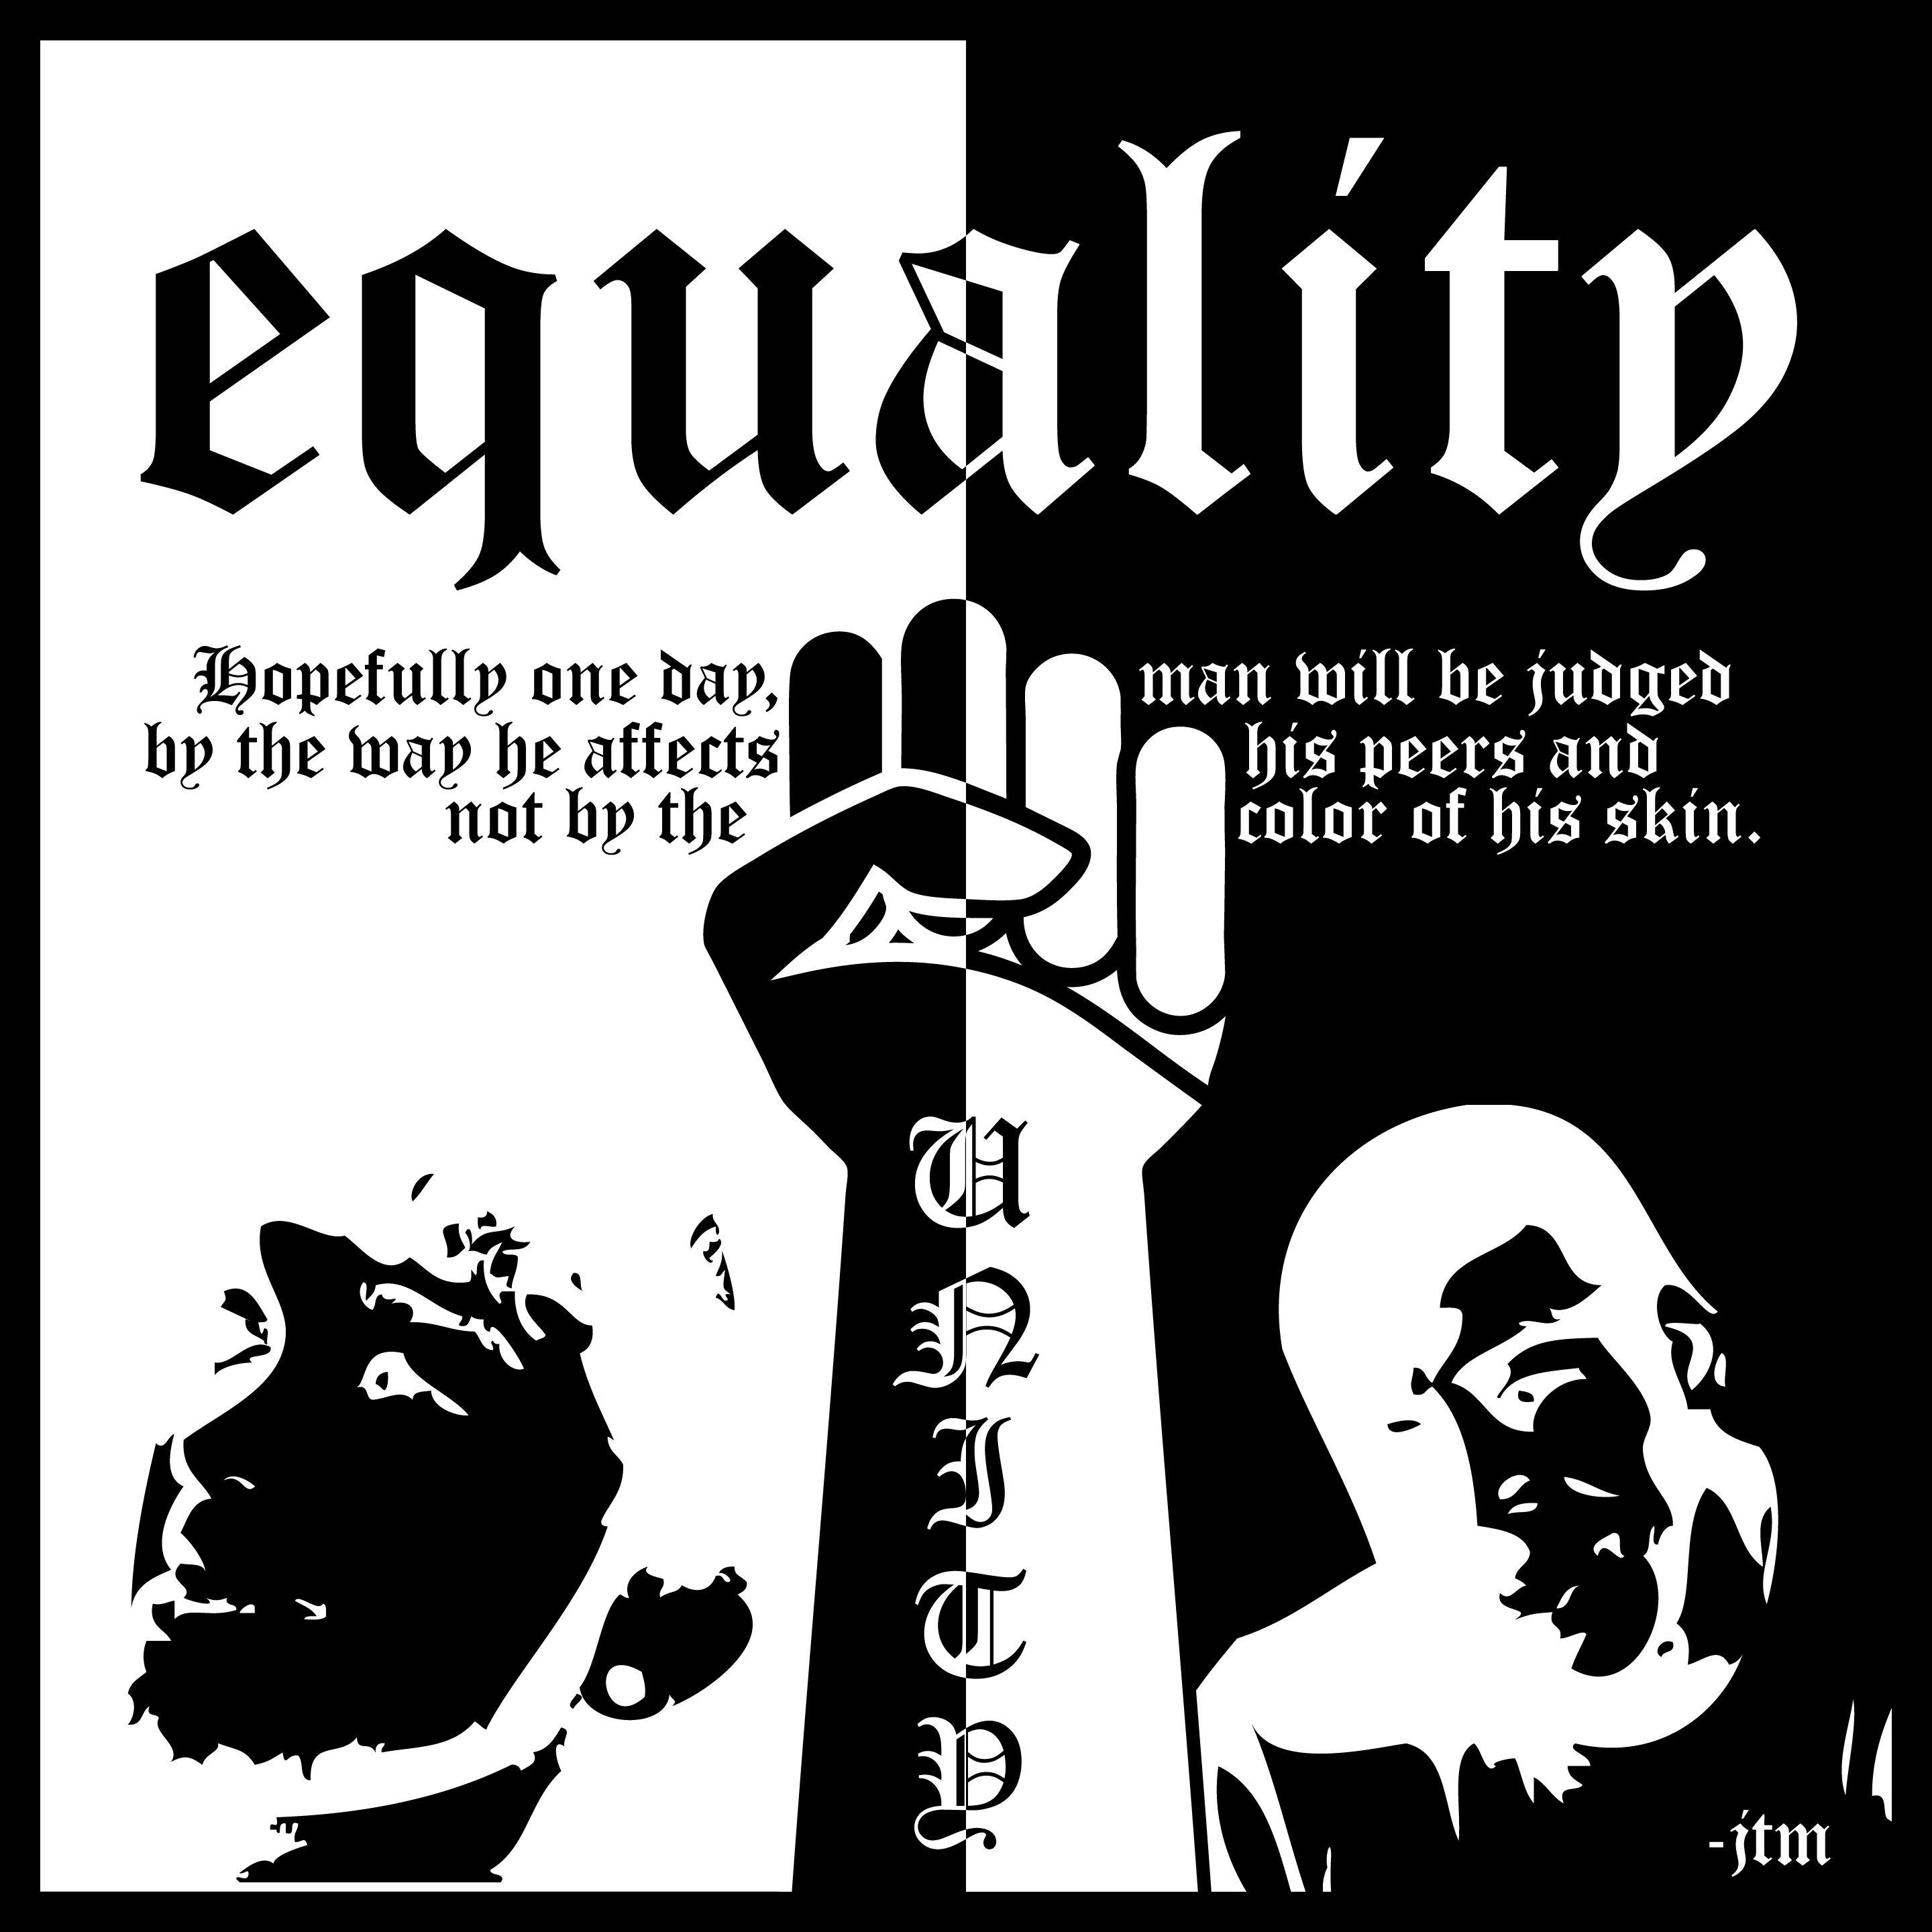 Human Rights image Race Equality HD wallpaper and background photo